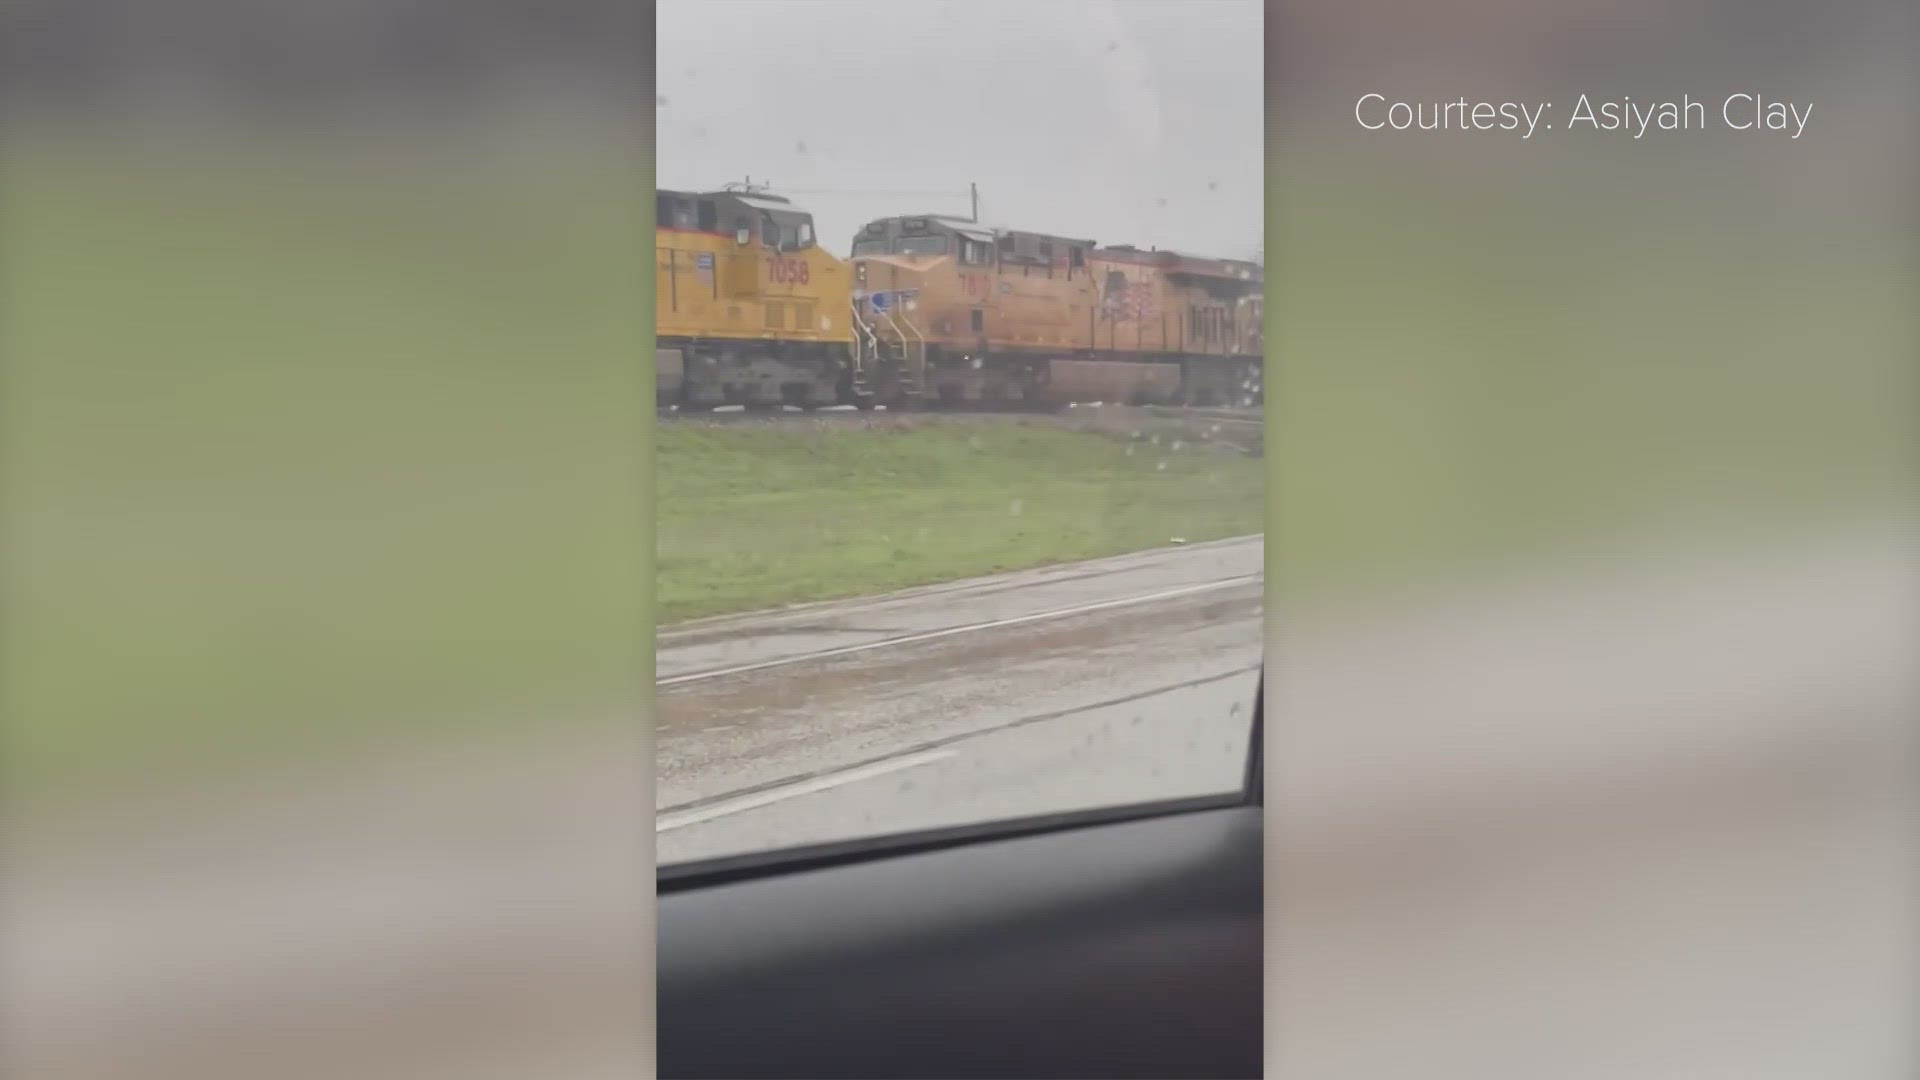 A train barreled through a semitruck that had potentially stalled on the railroad track.